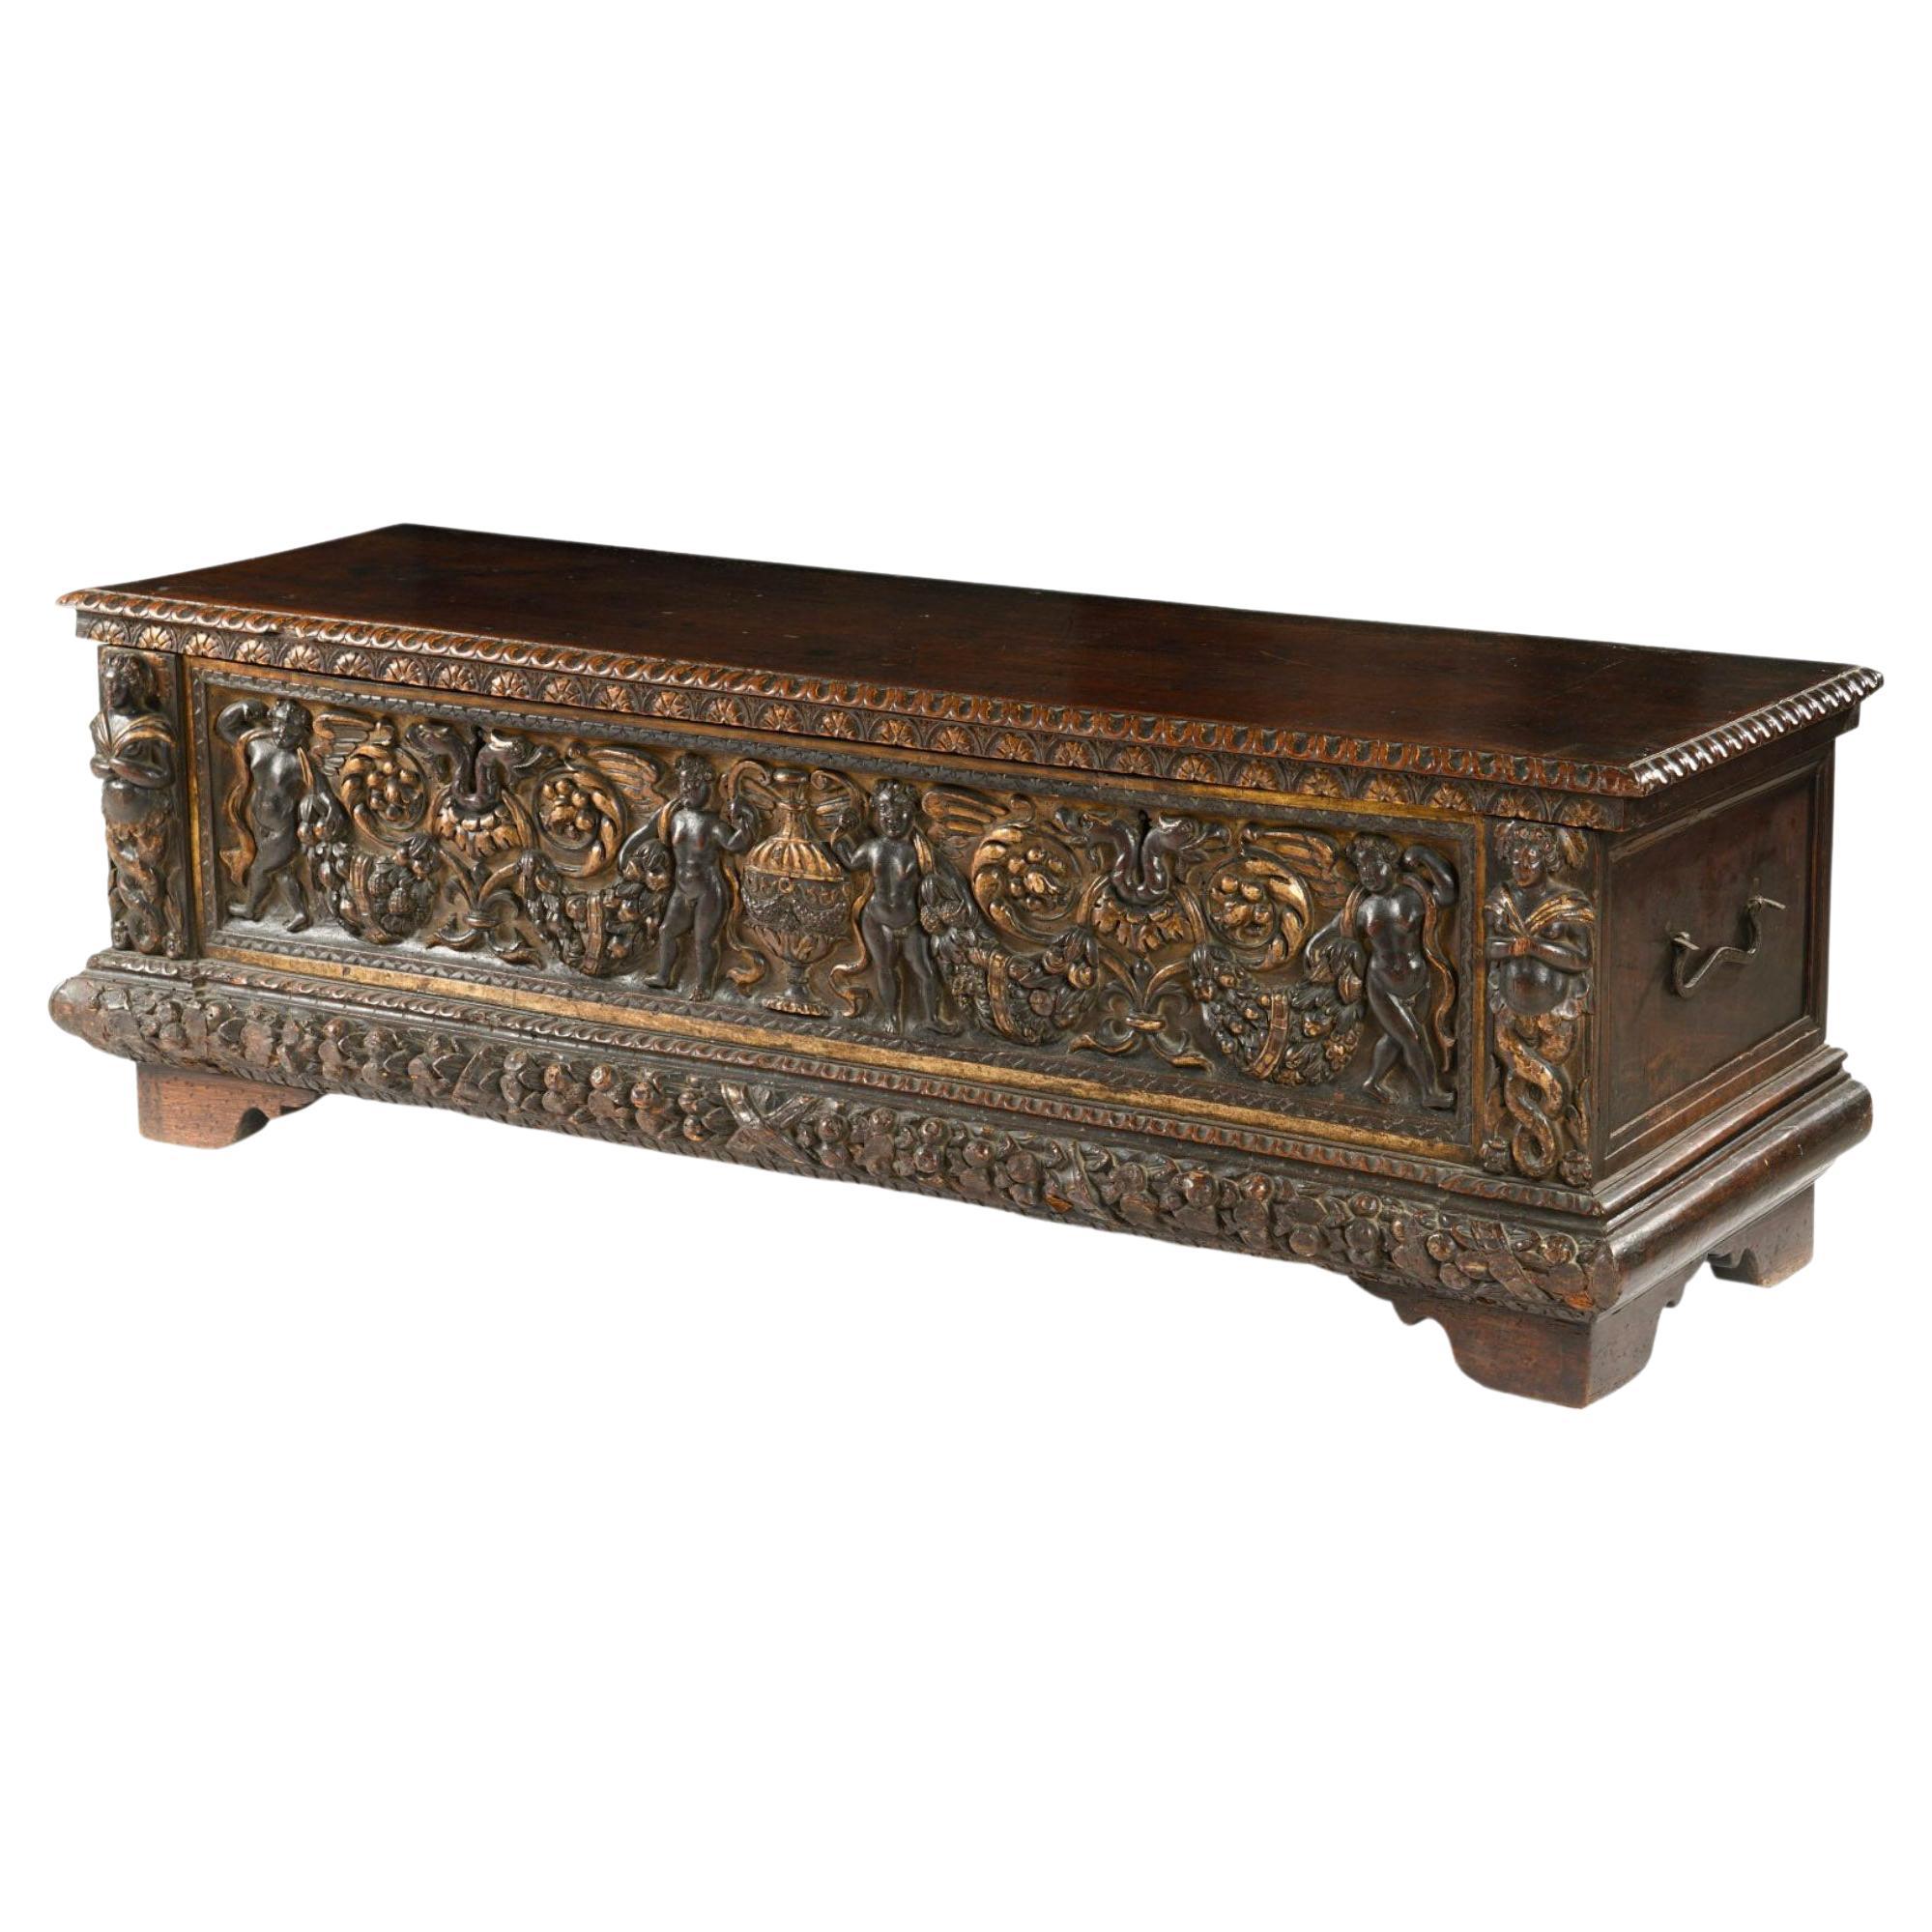 Exceptional Italian Renaissance Cassone with Rich Carving on a Gilt Background For Sale